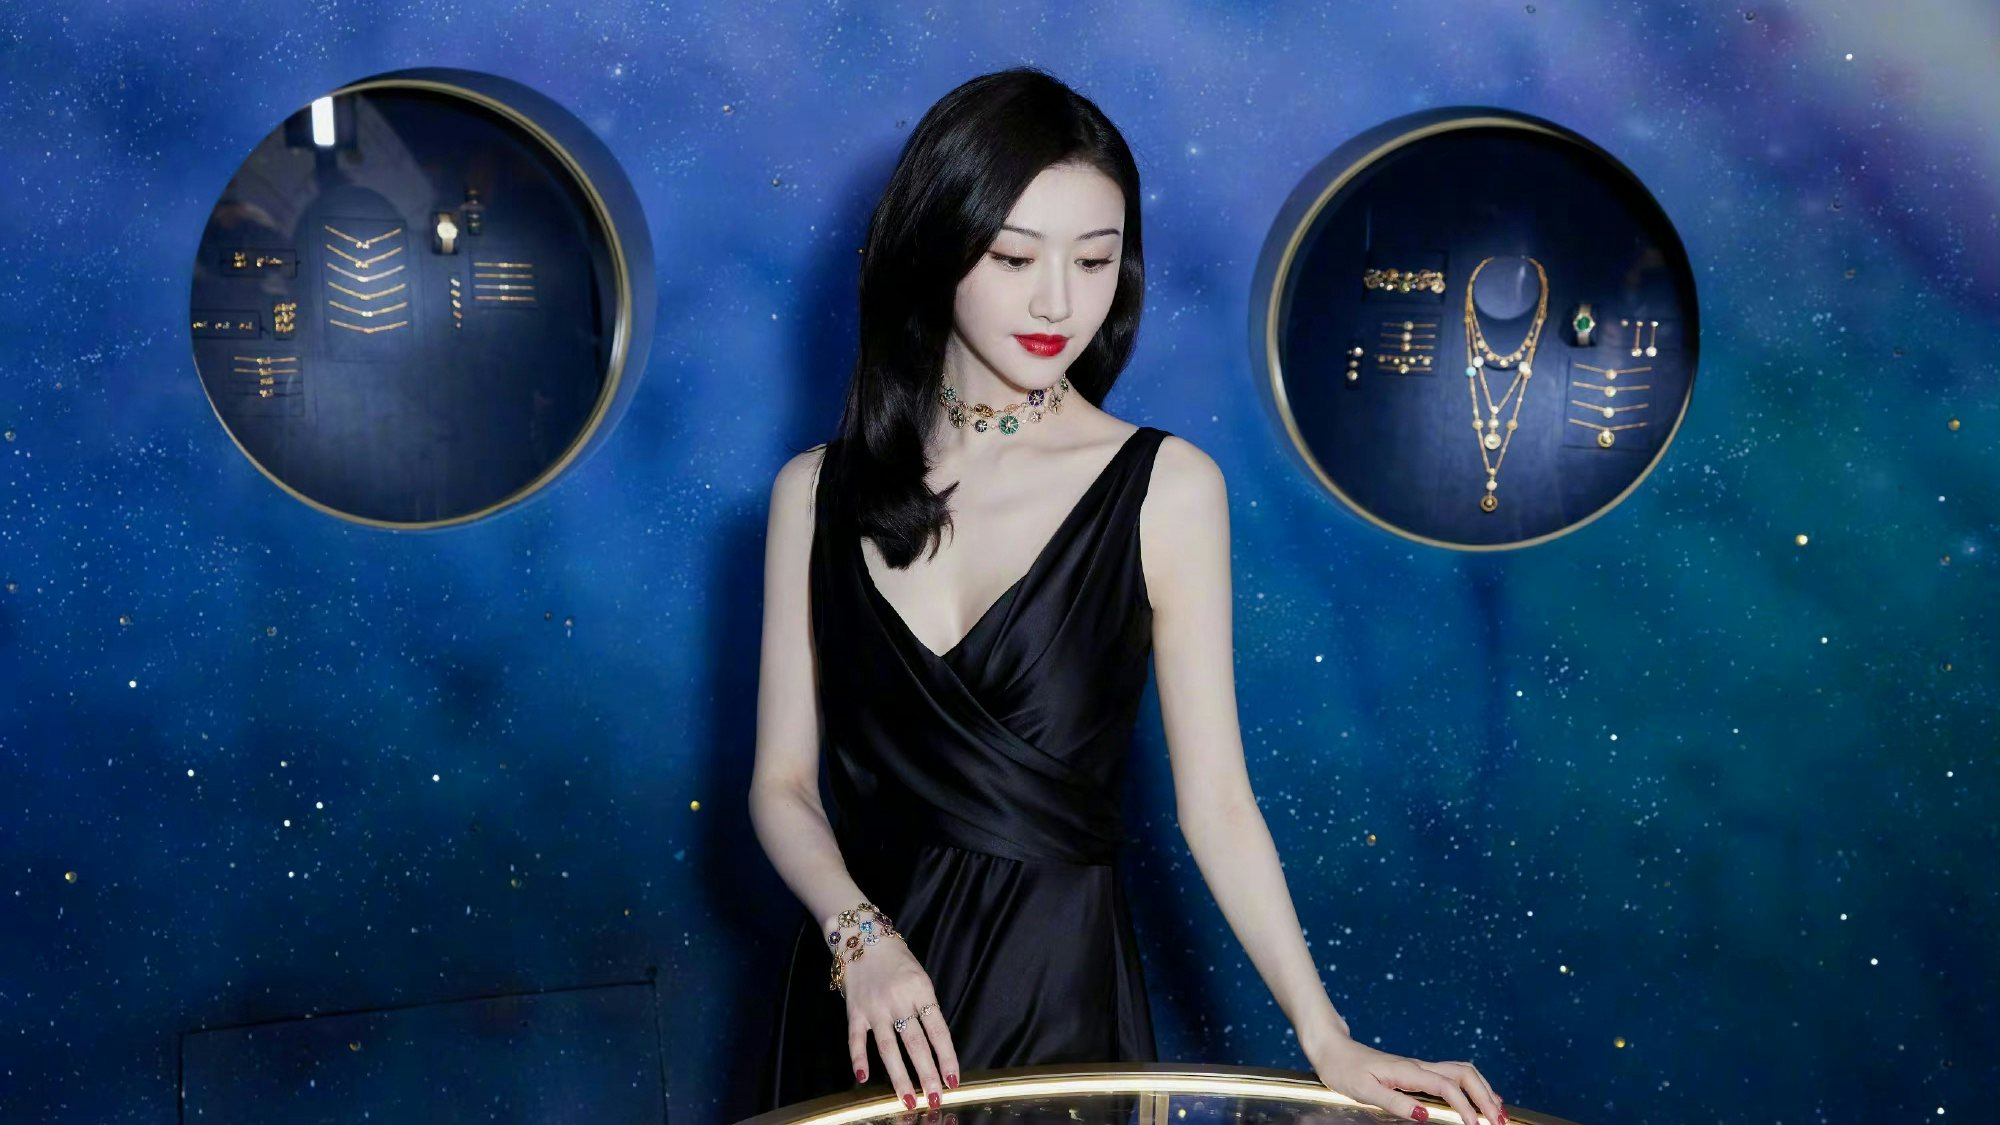 With brands doing all they can to avoid celebrity scandals, China announces further regulations for endorsements. From socialism to due diligence, here’s what luxury needs to know when hiring VIPs. Photo: Jing Tian's Weibo